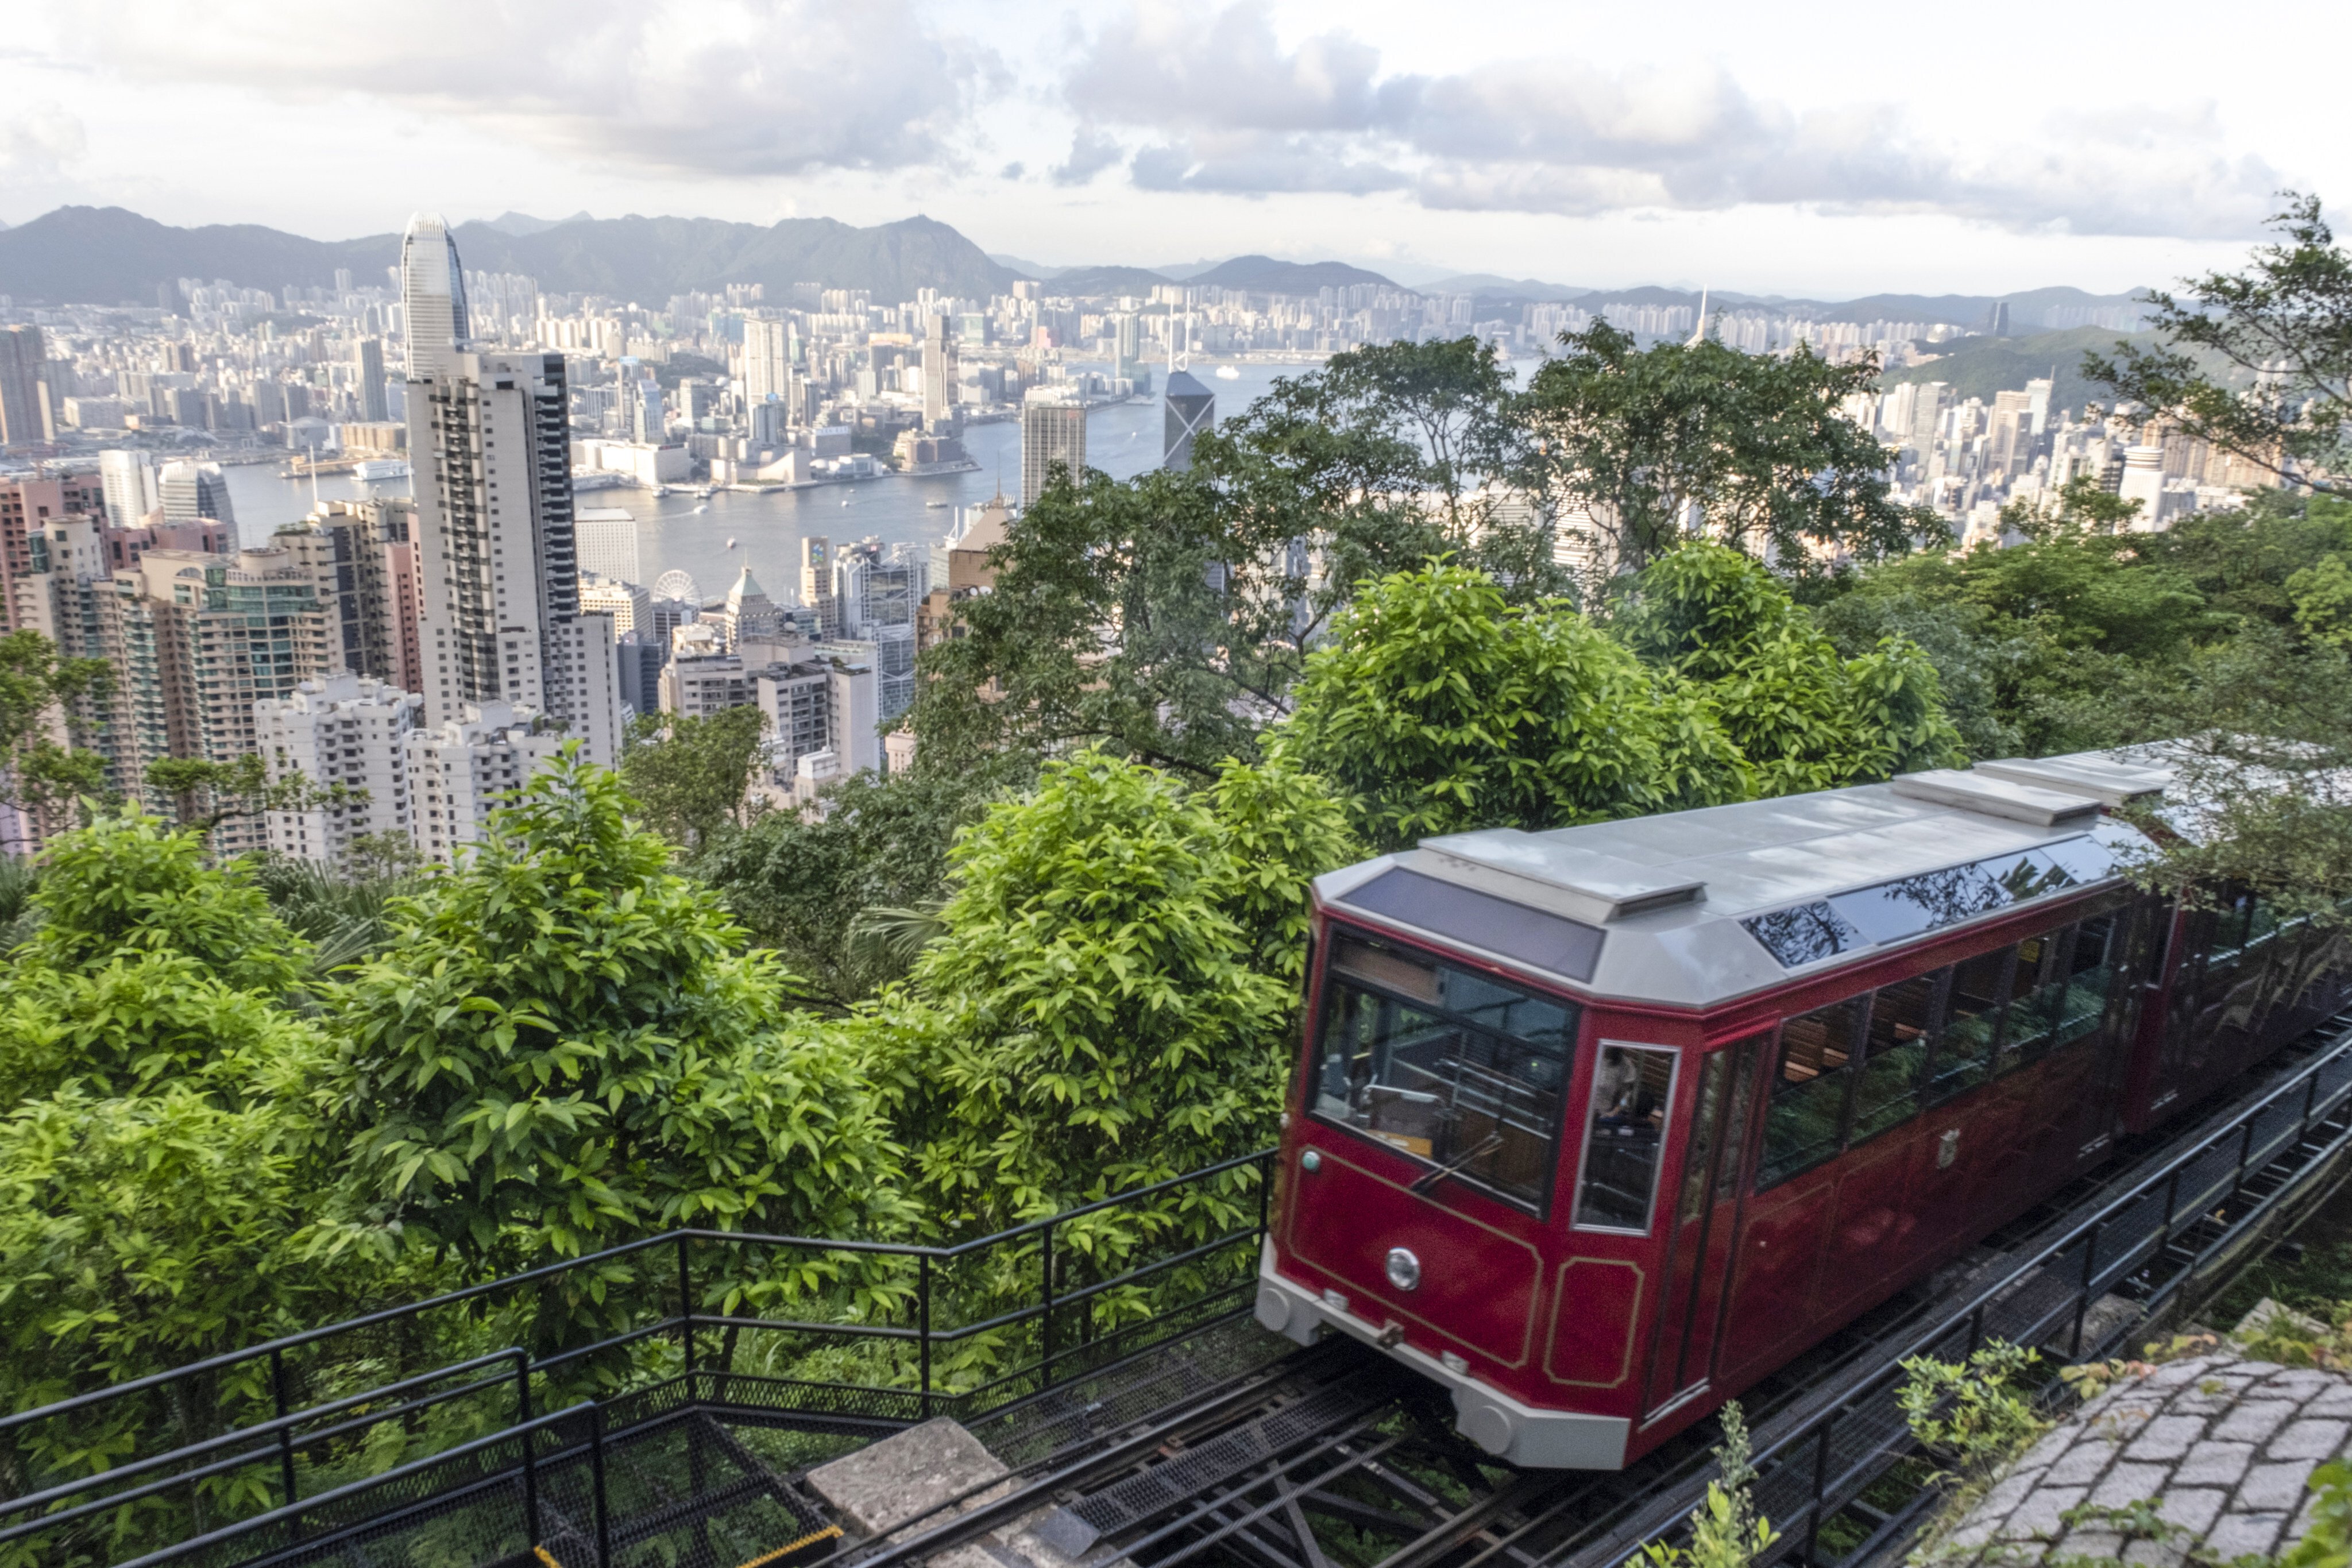 Hong Kong’s famous Peak Tram closes on June 28 for six months to allow the replacement of track and cabling and the introduction of new, larger carriages. Photo: Sun Yeung